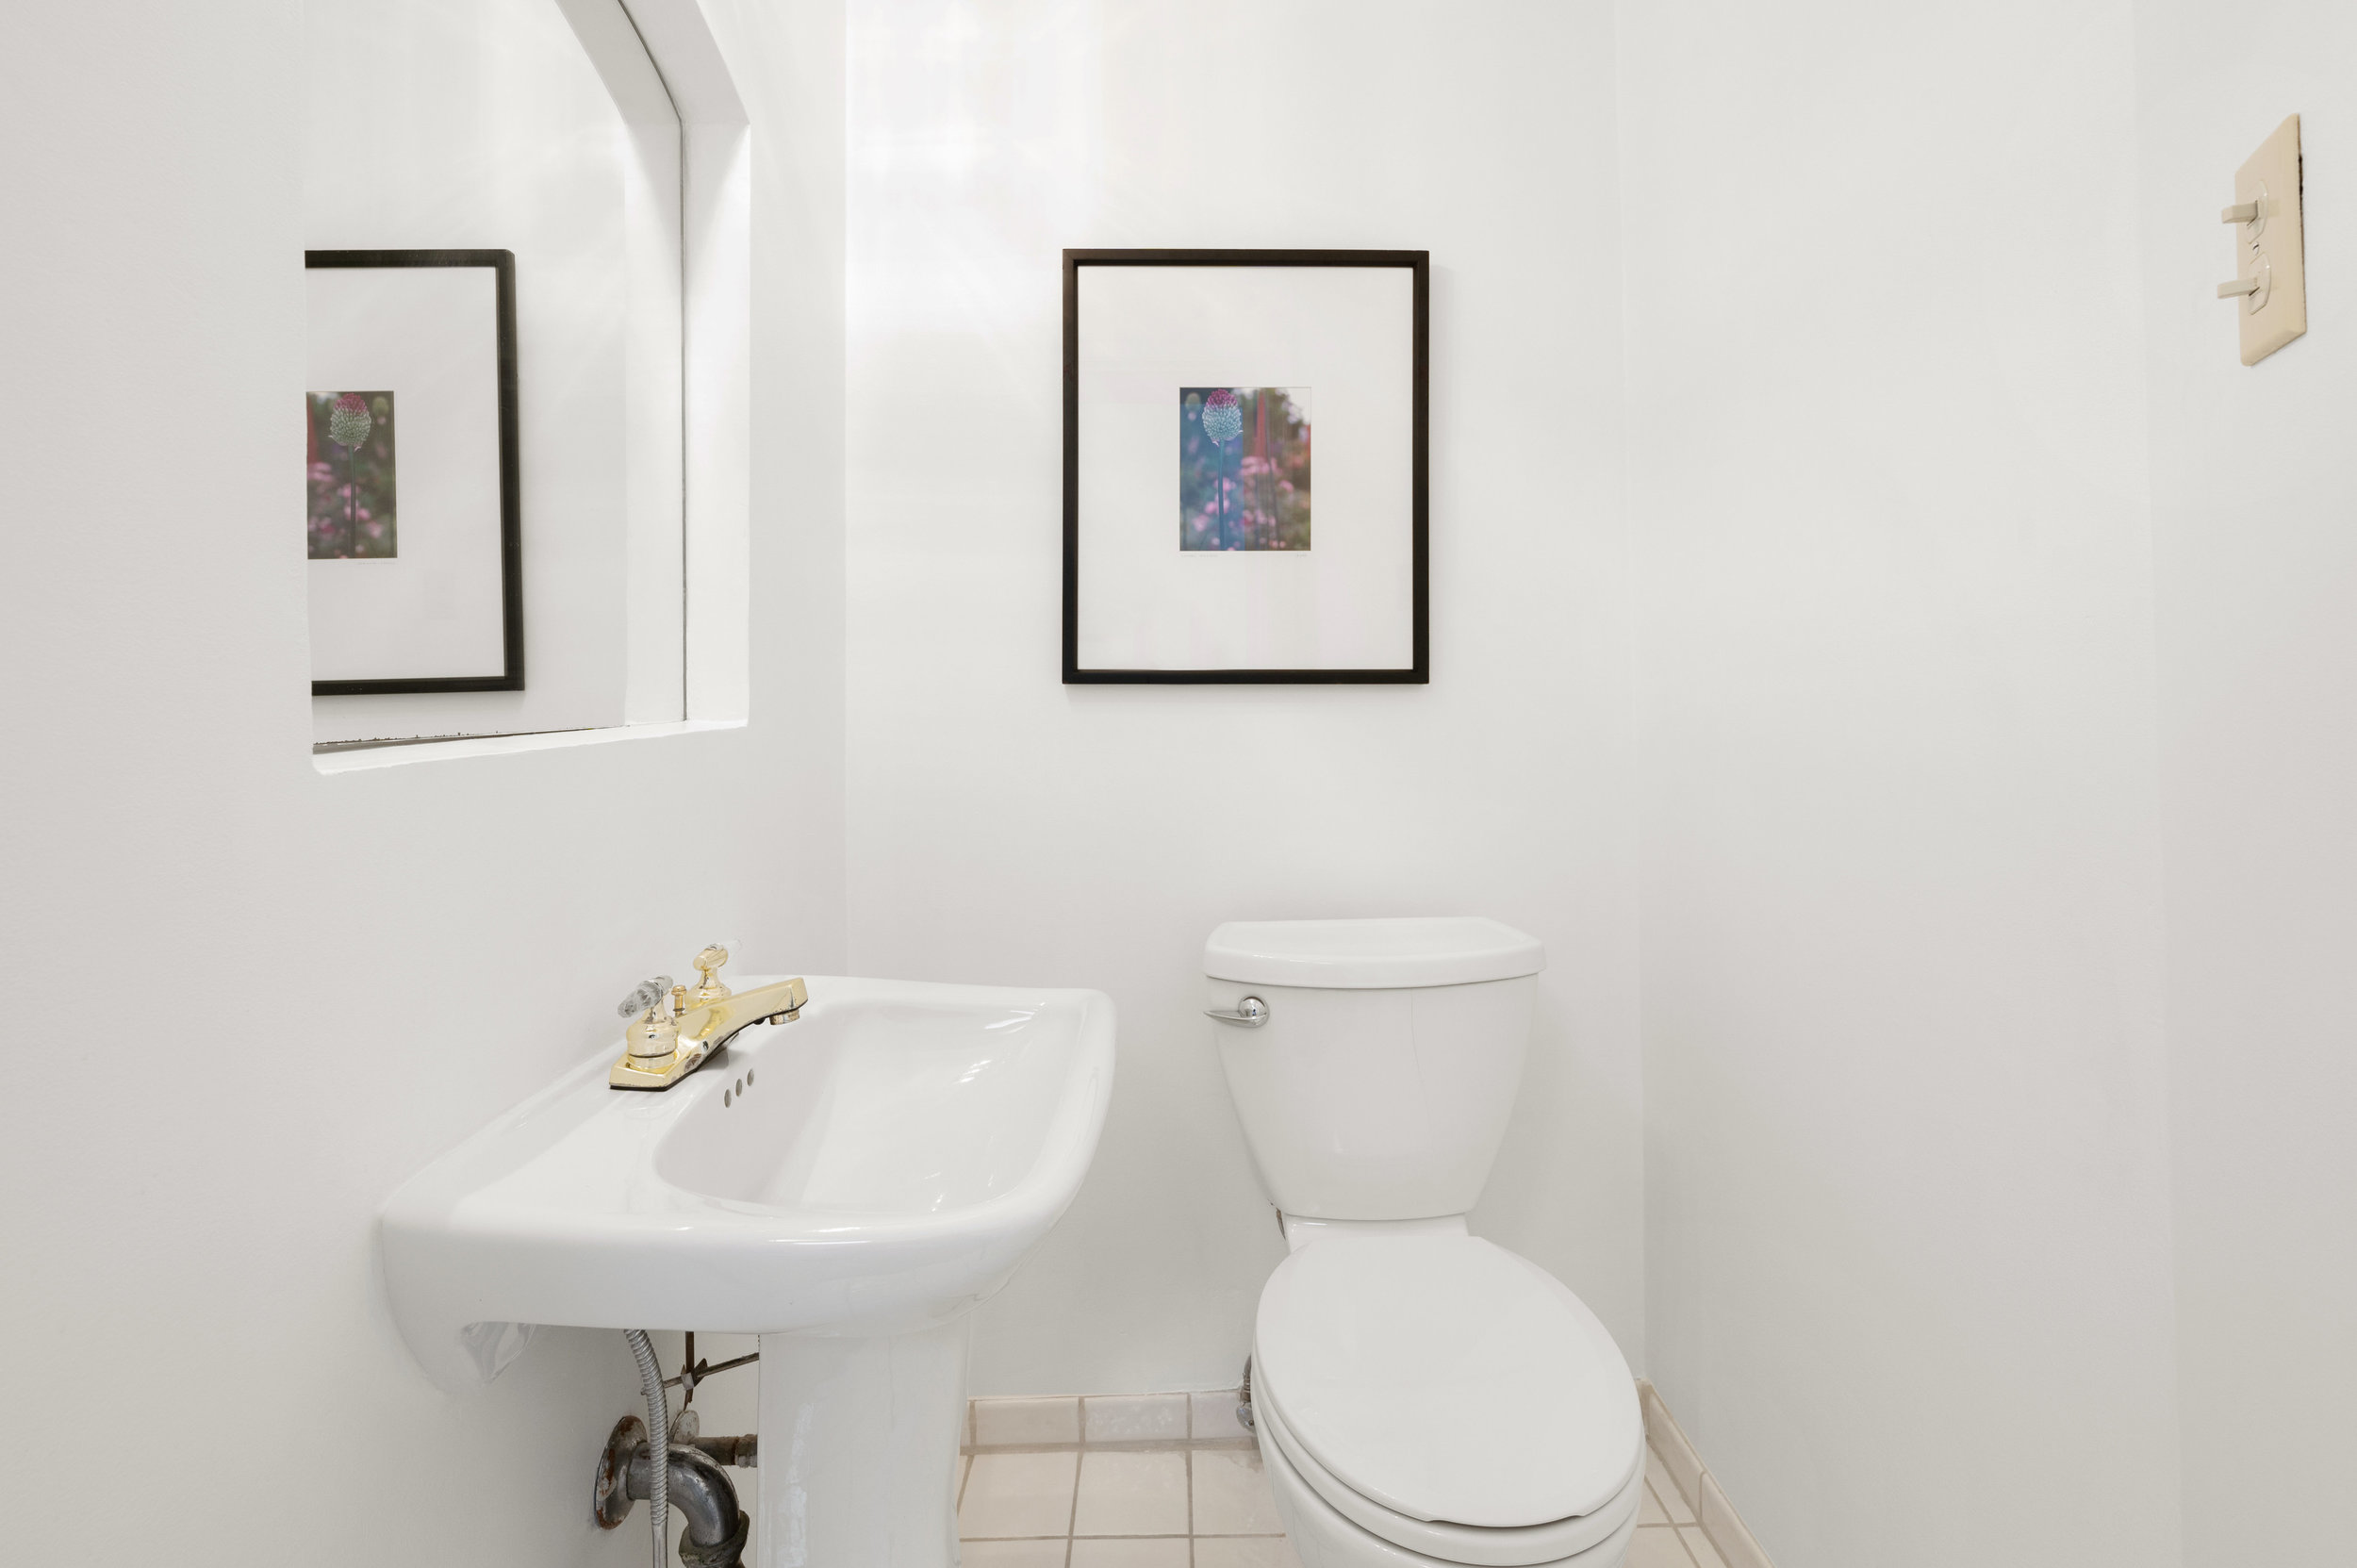 Property Photo: Bathroom three, showing a small vanity